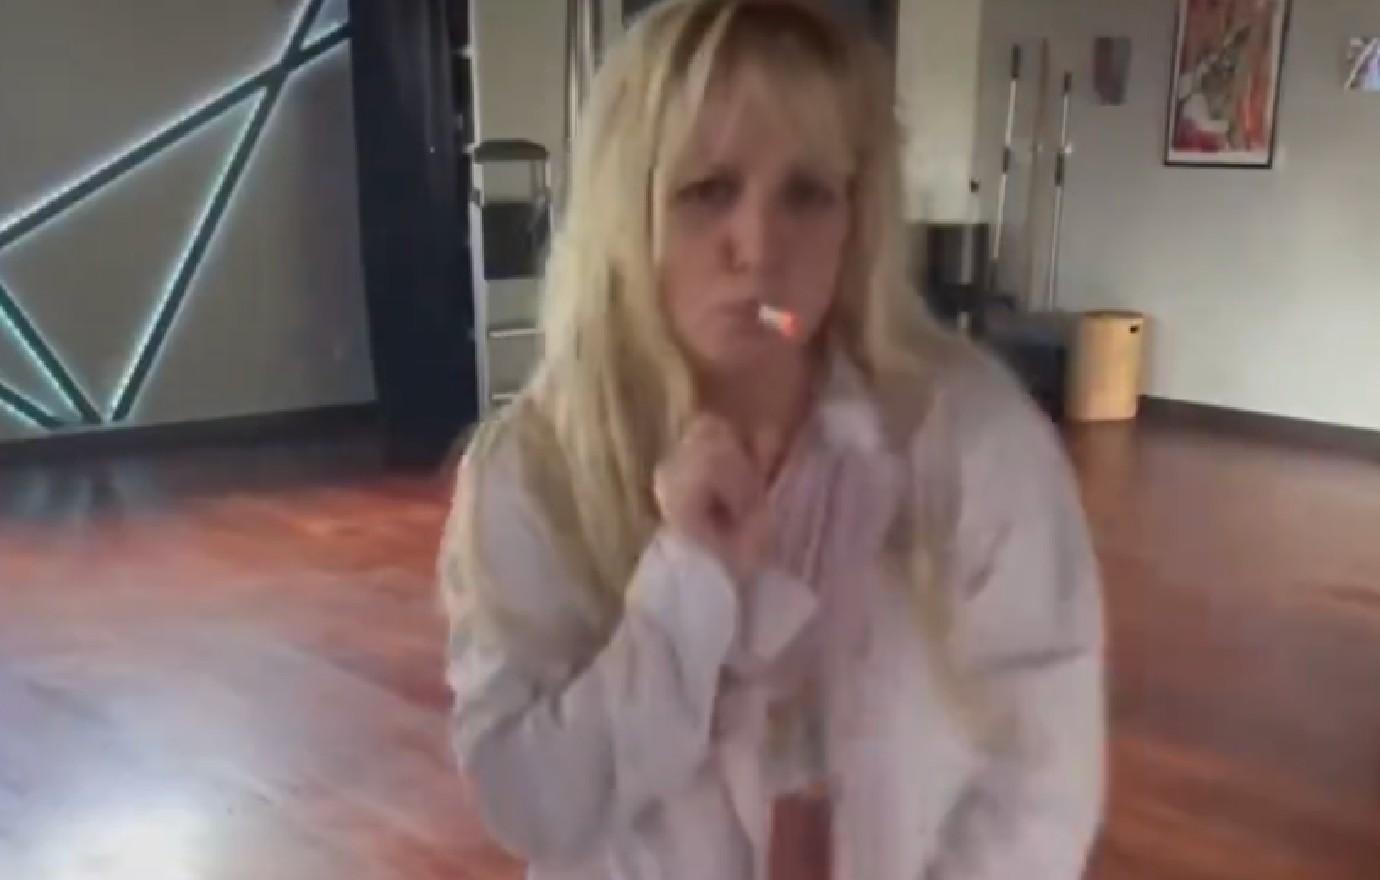 Britney Spears Deletes Videos Of Herself Smoking In Risqué Outfits